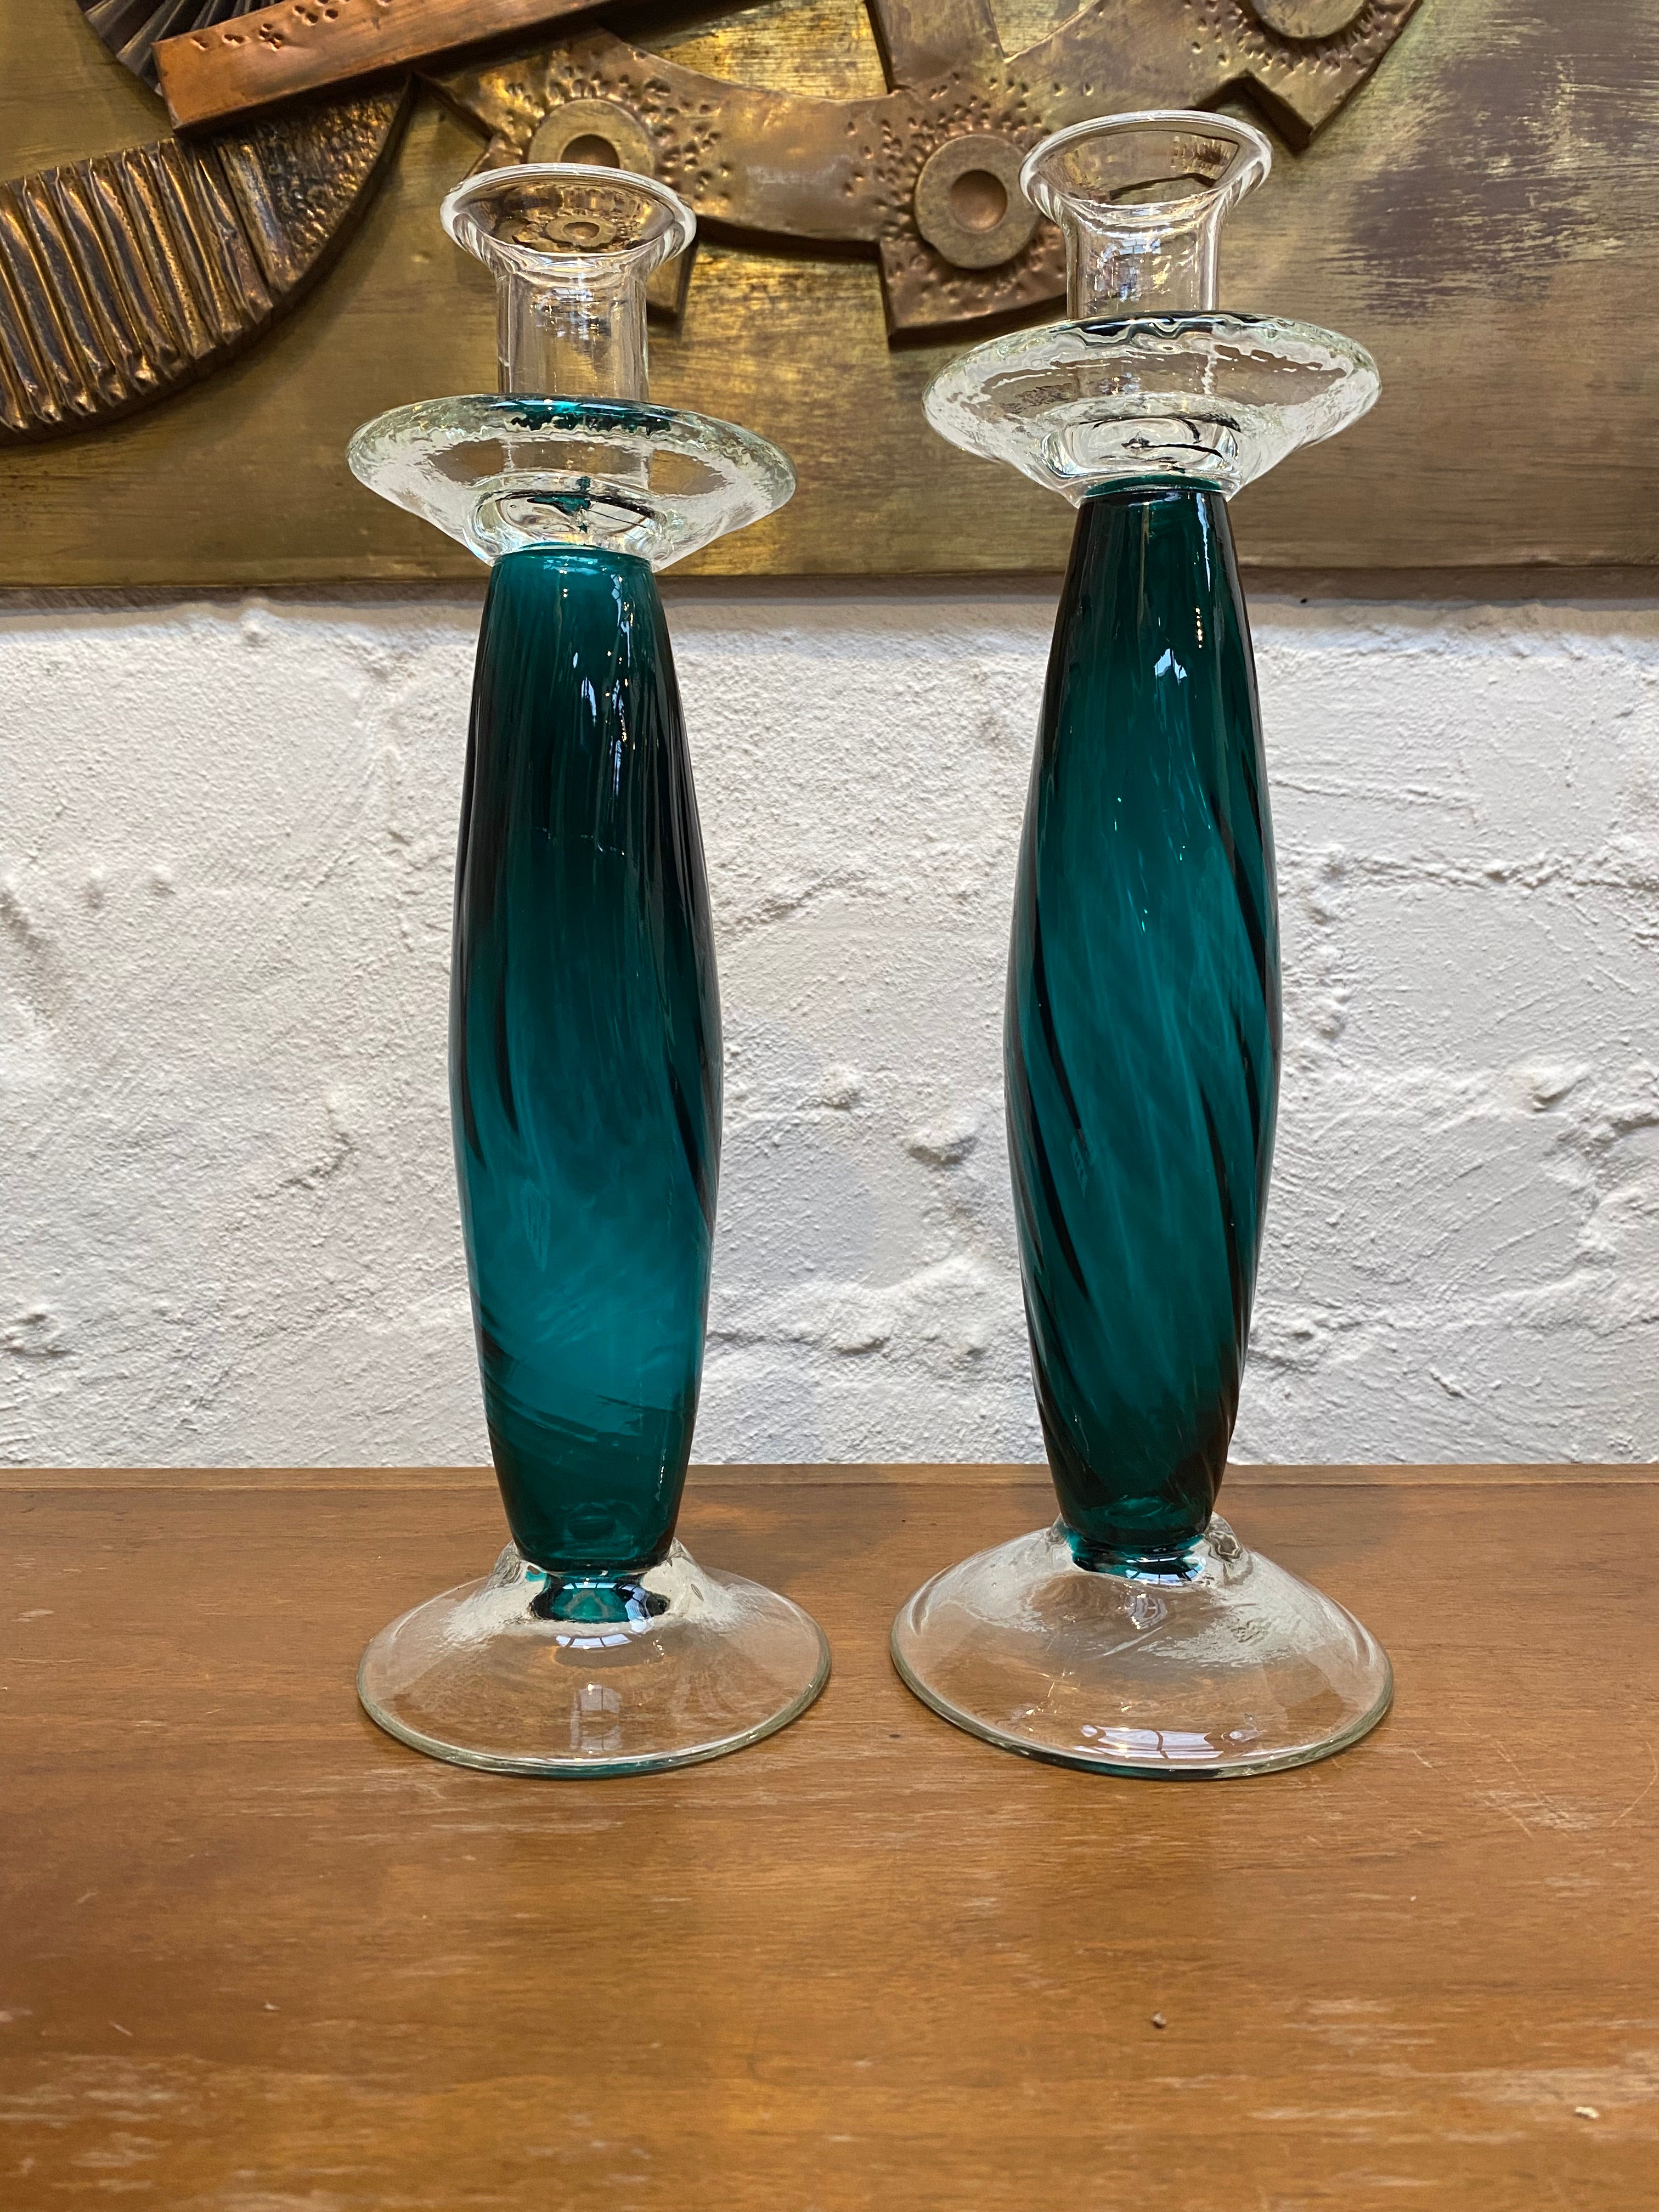 A pair of wildly romantic 1980s candlesticks in the Empoli style - bold and bountiful.  

Very pretty Teal coloured glass balloon stems with spiral pattern, finished with a clear glass candle holder and wide dish for wax. A clear glass foot or